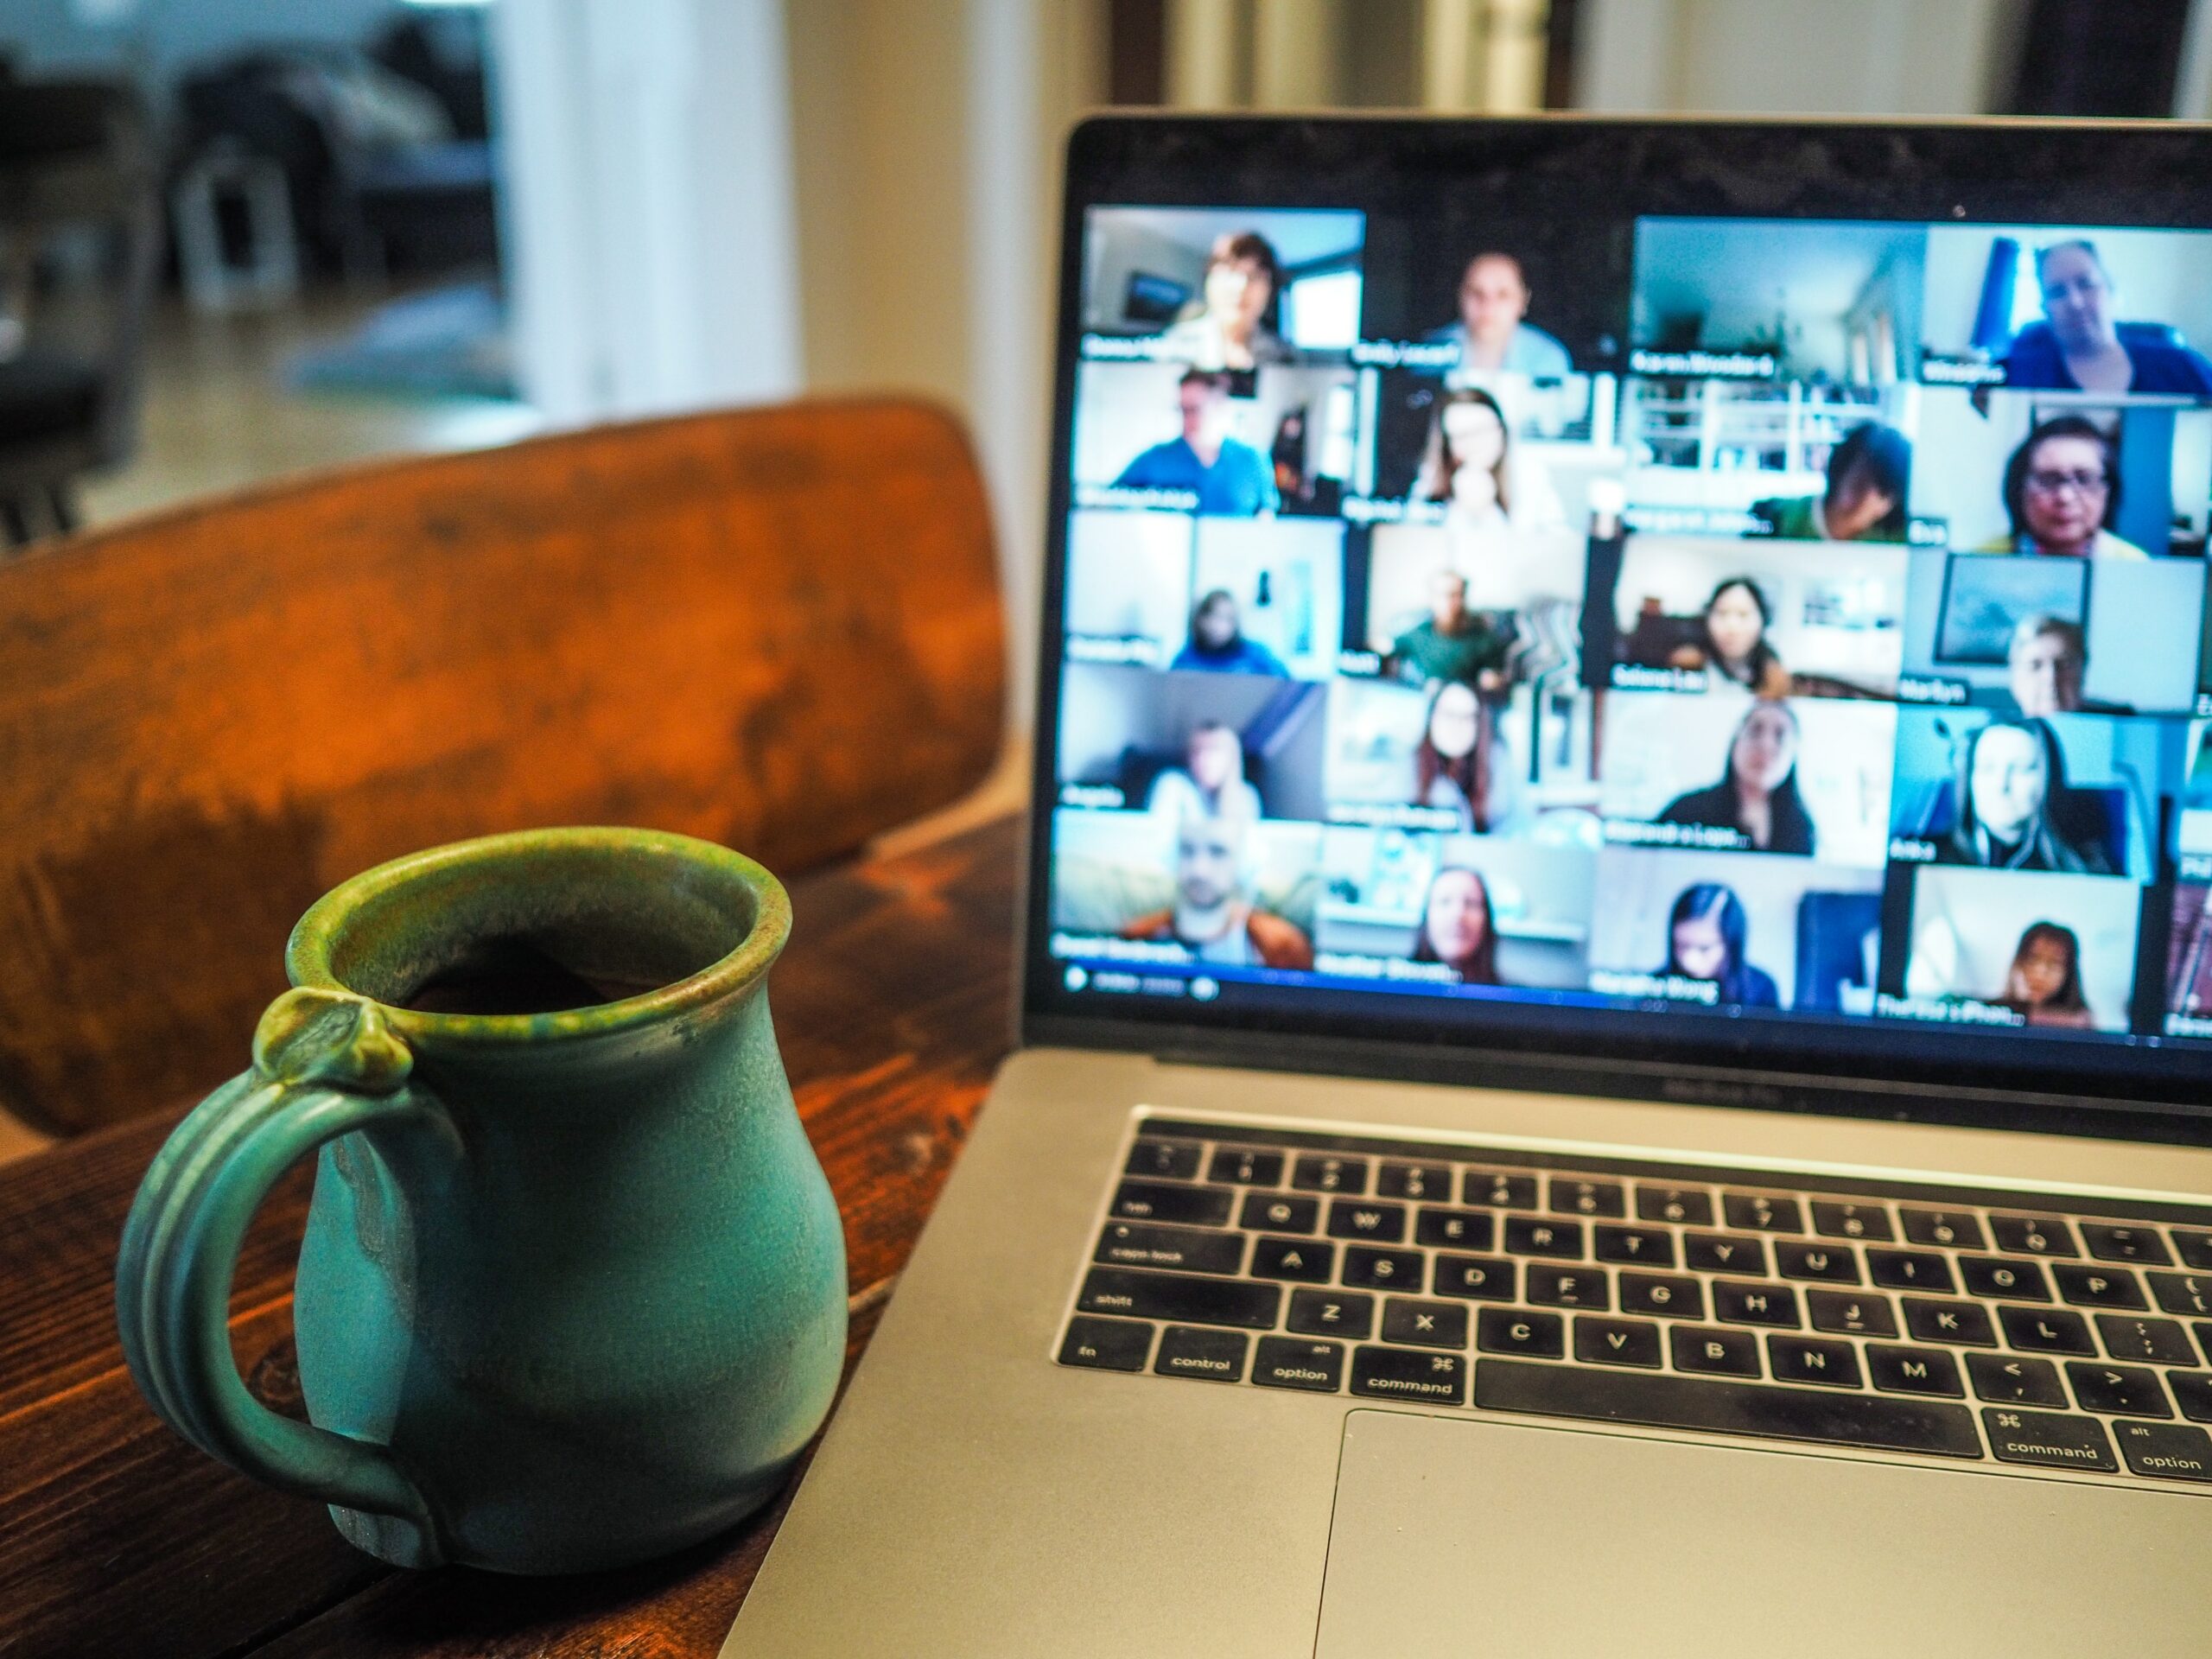 A laptop – showing a Zoom call with several people – next to a mug of coffee.